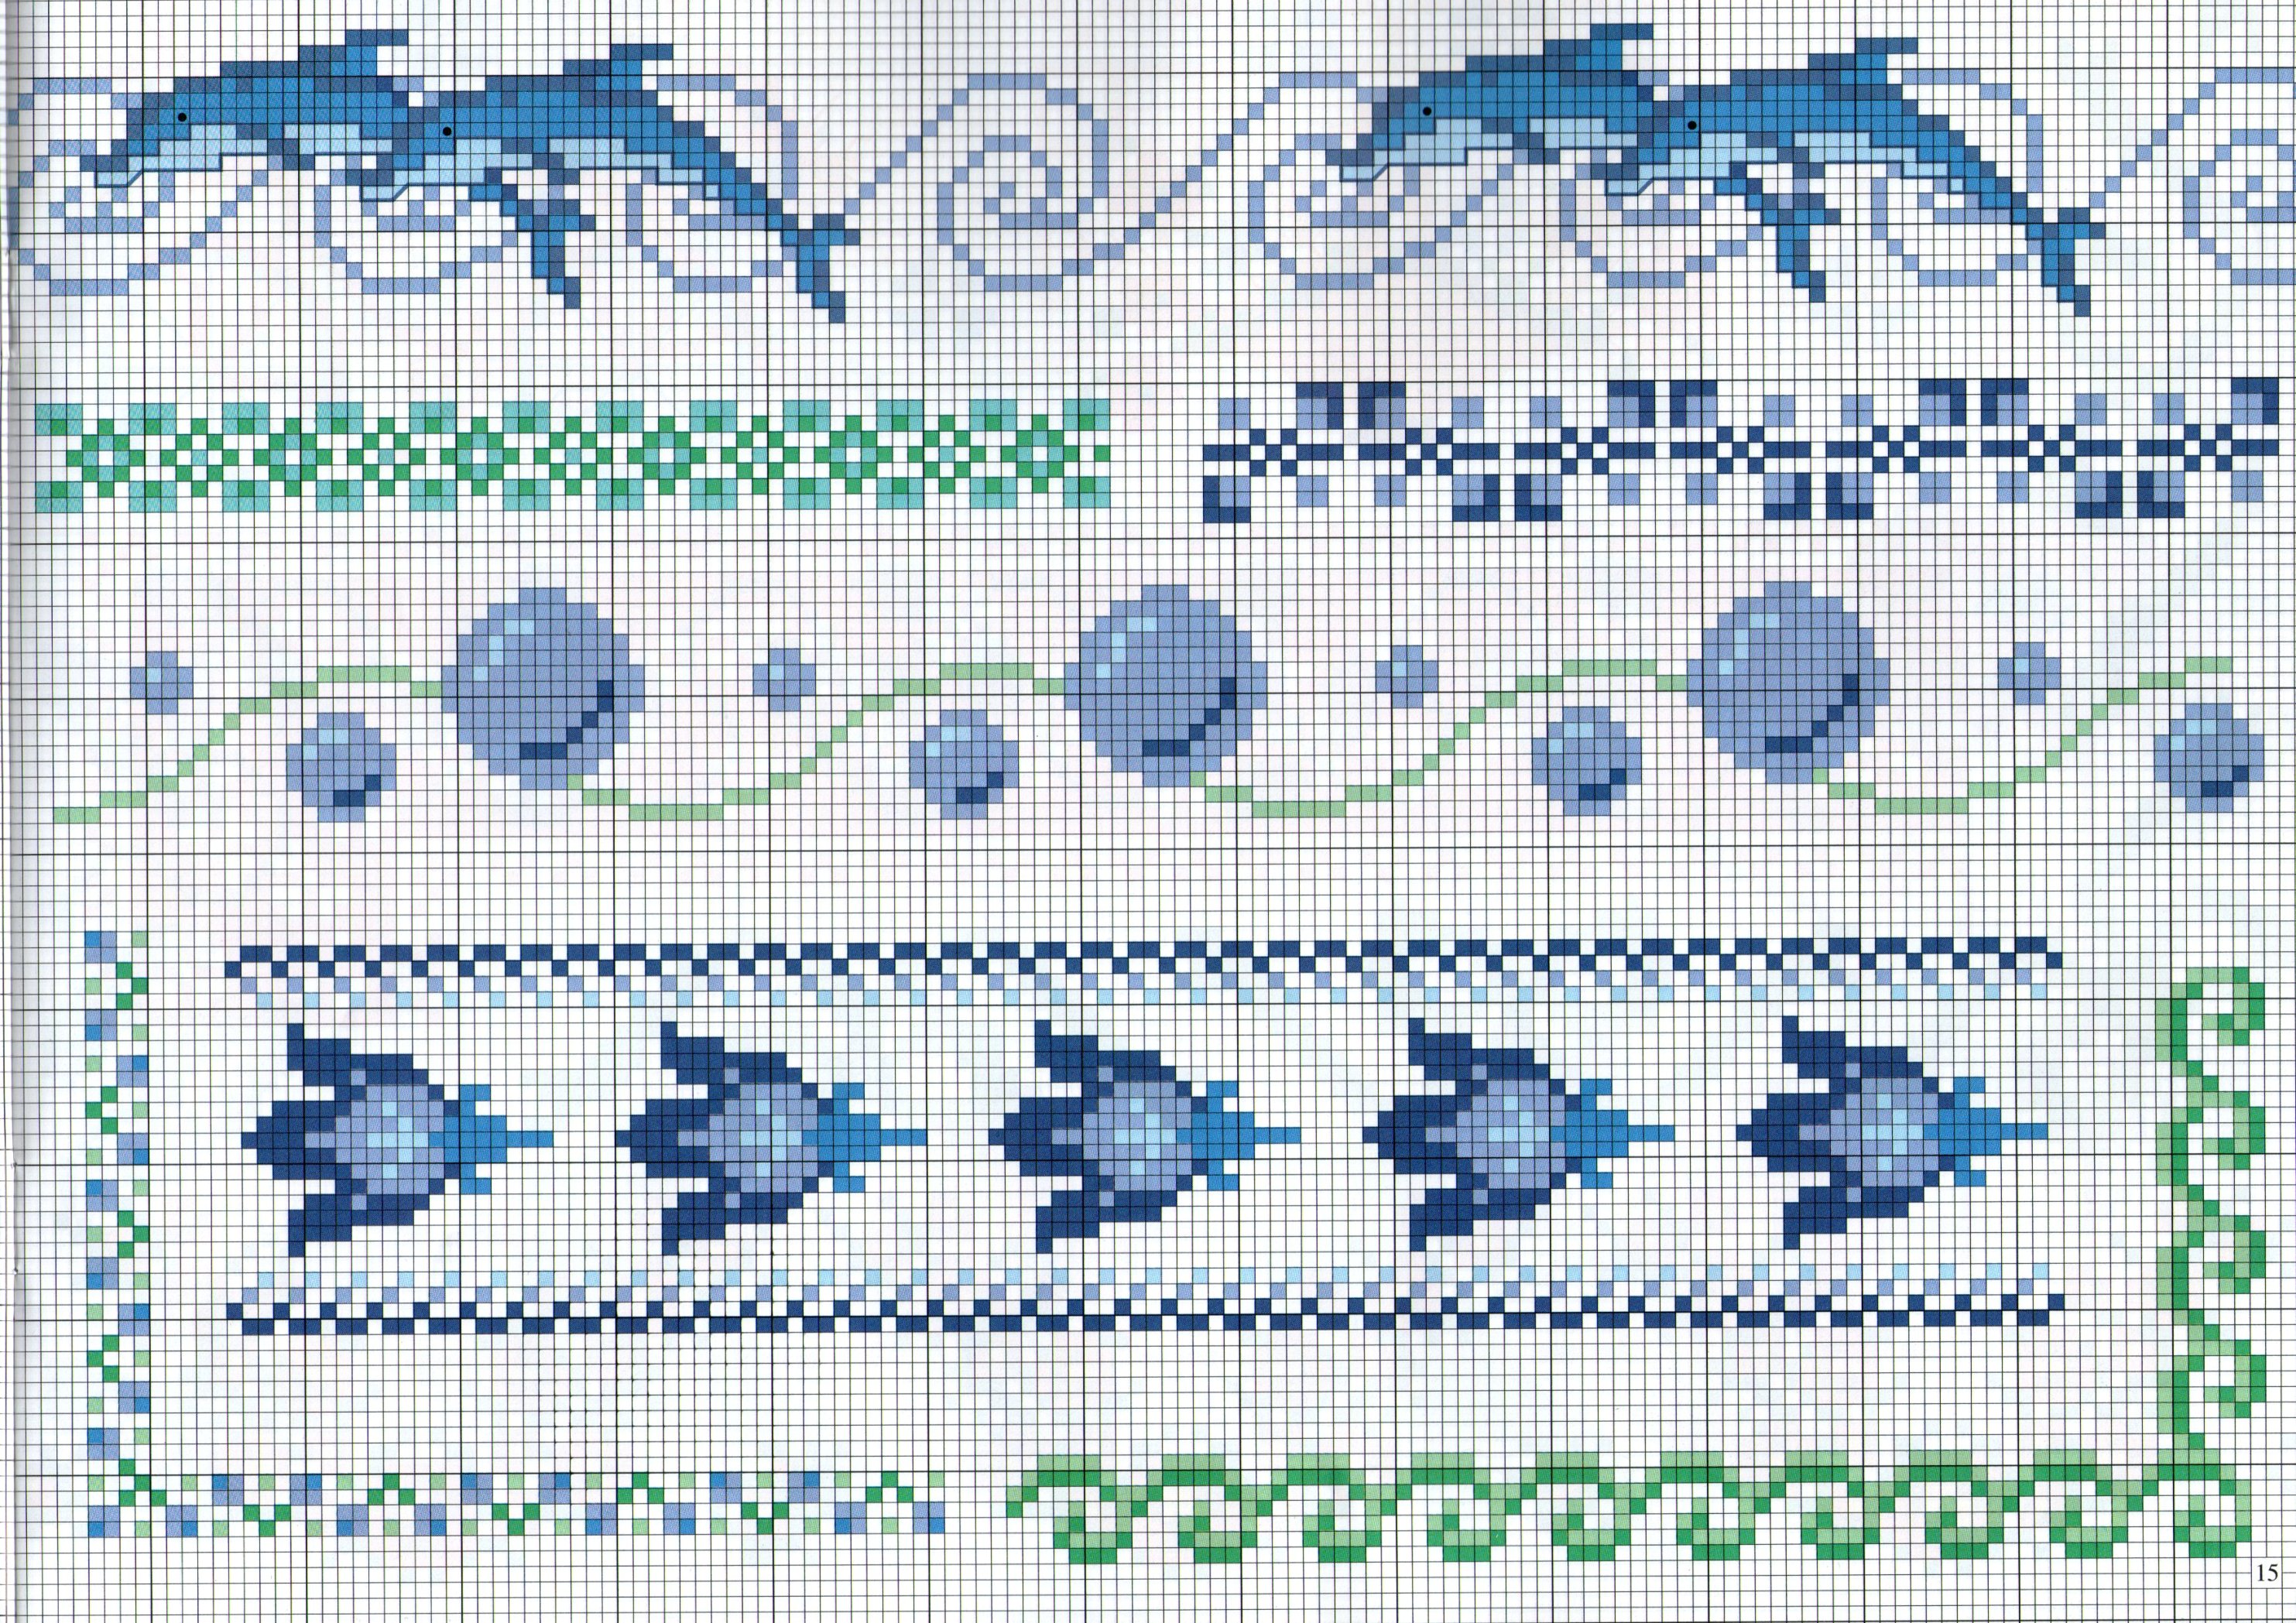 borders Cross stitch theme with dolphins and sea water bubbles